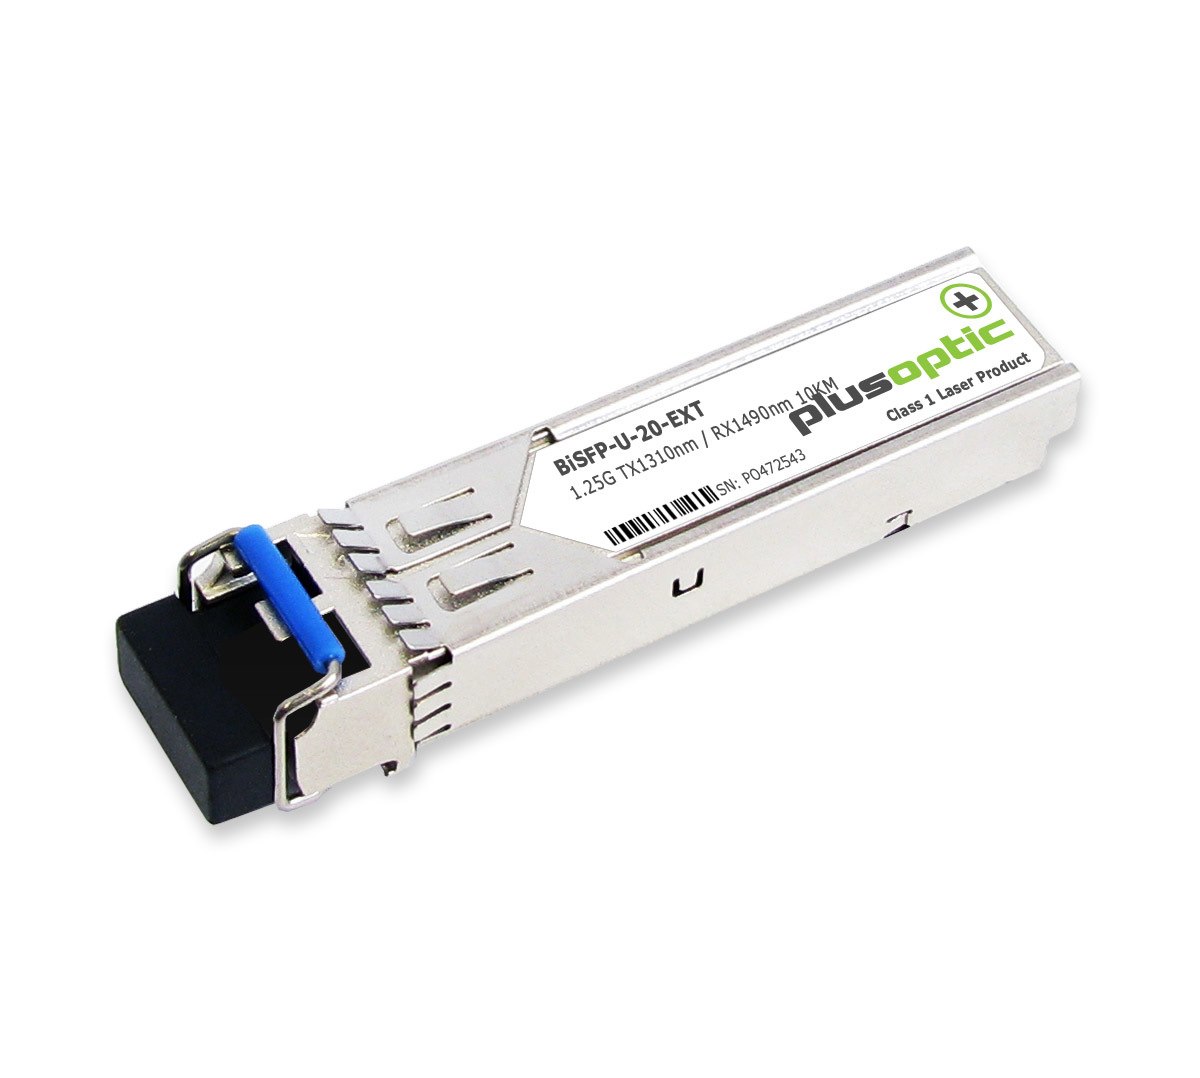 PlusOptic Extreme Compatible (10057 10057H 1G-Sfp-Bxu) 1.25G, BiDi SFP, TX1310nm / RX1490nm, 20KM Transceiver, LC Connector For SMF With Dom | PlusOptic Bisfp-U-20-Ext